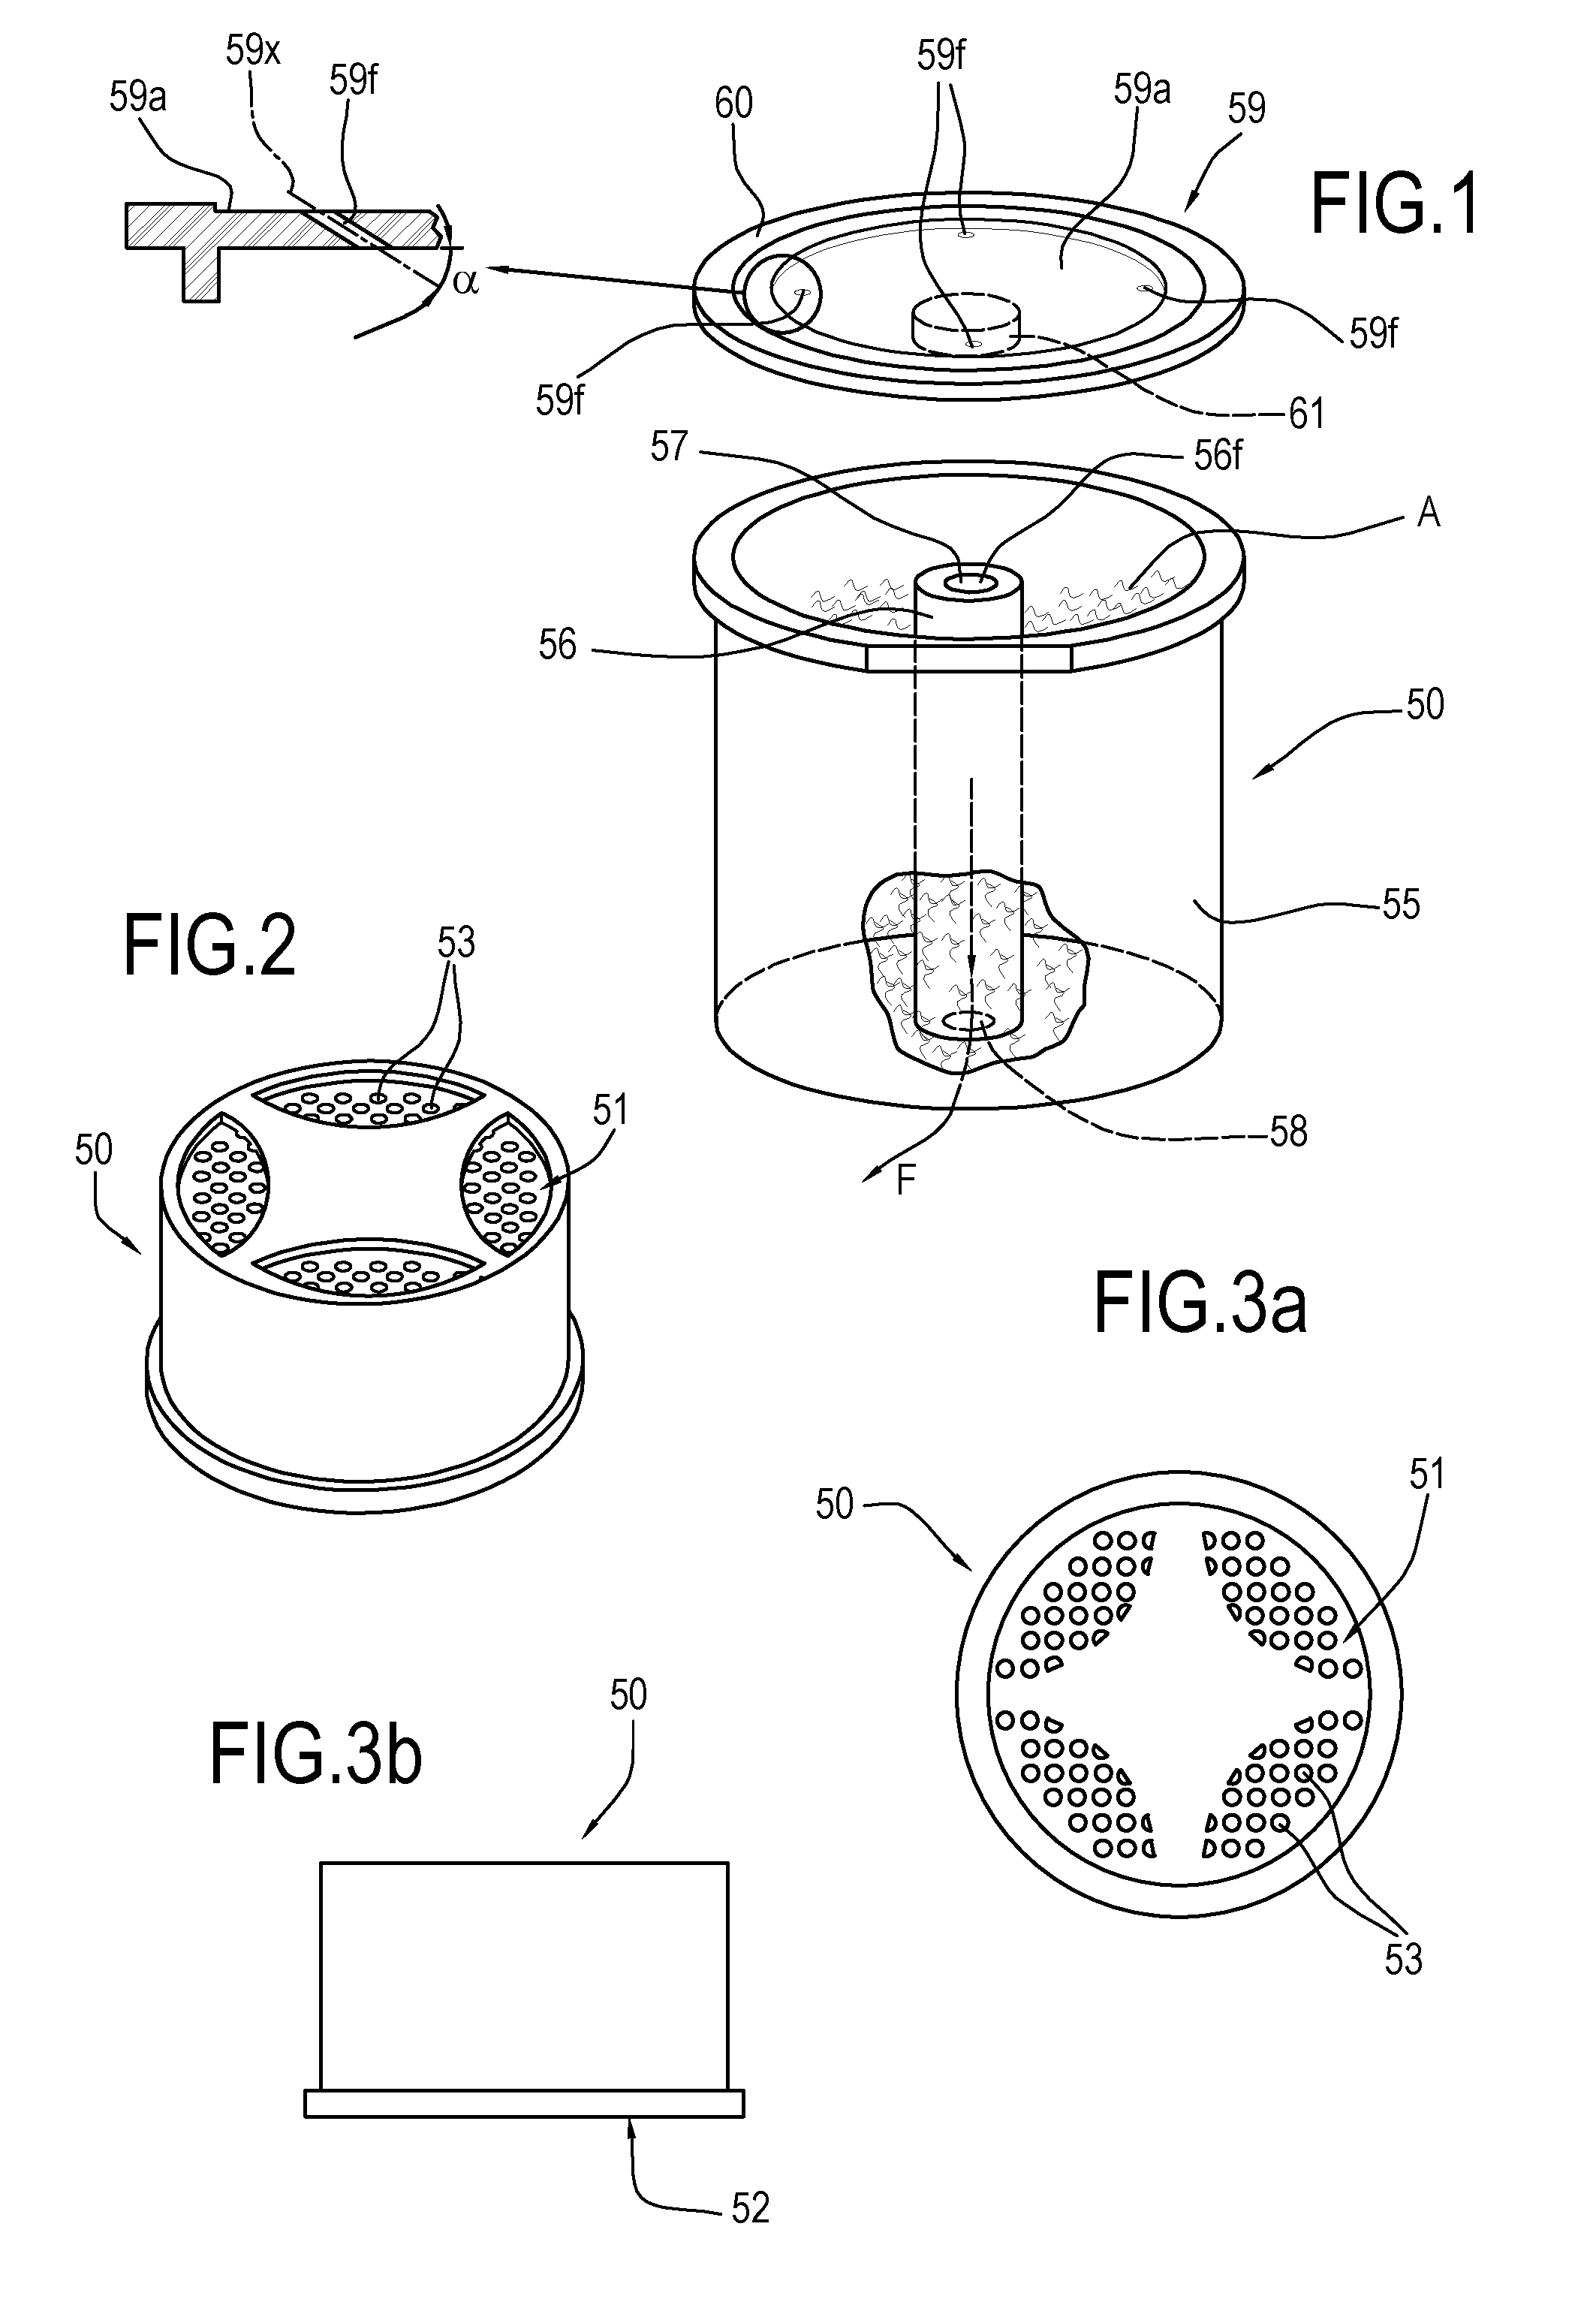 Apparatus and method for preparing and dispensing a single dose of a food product and a relative single-dose unit